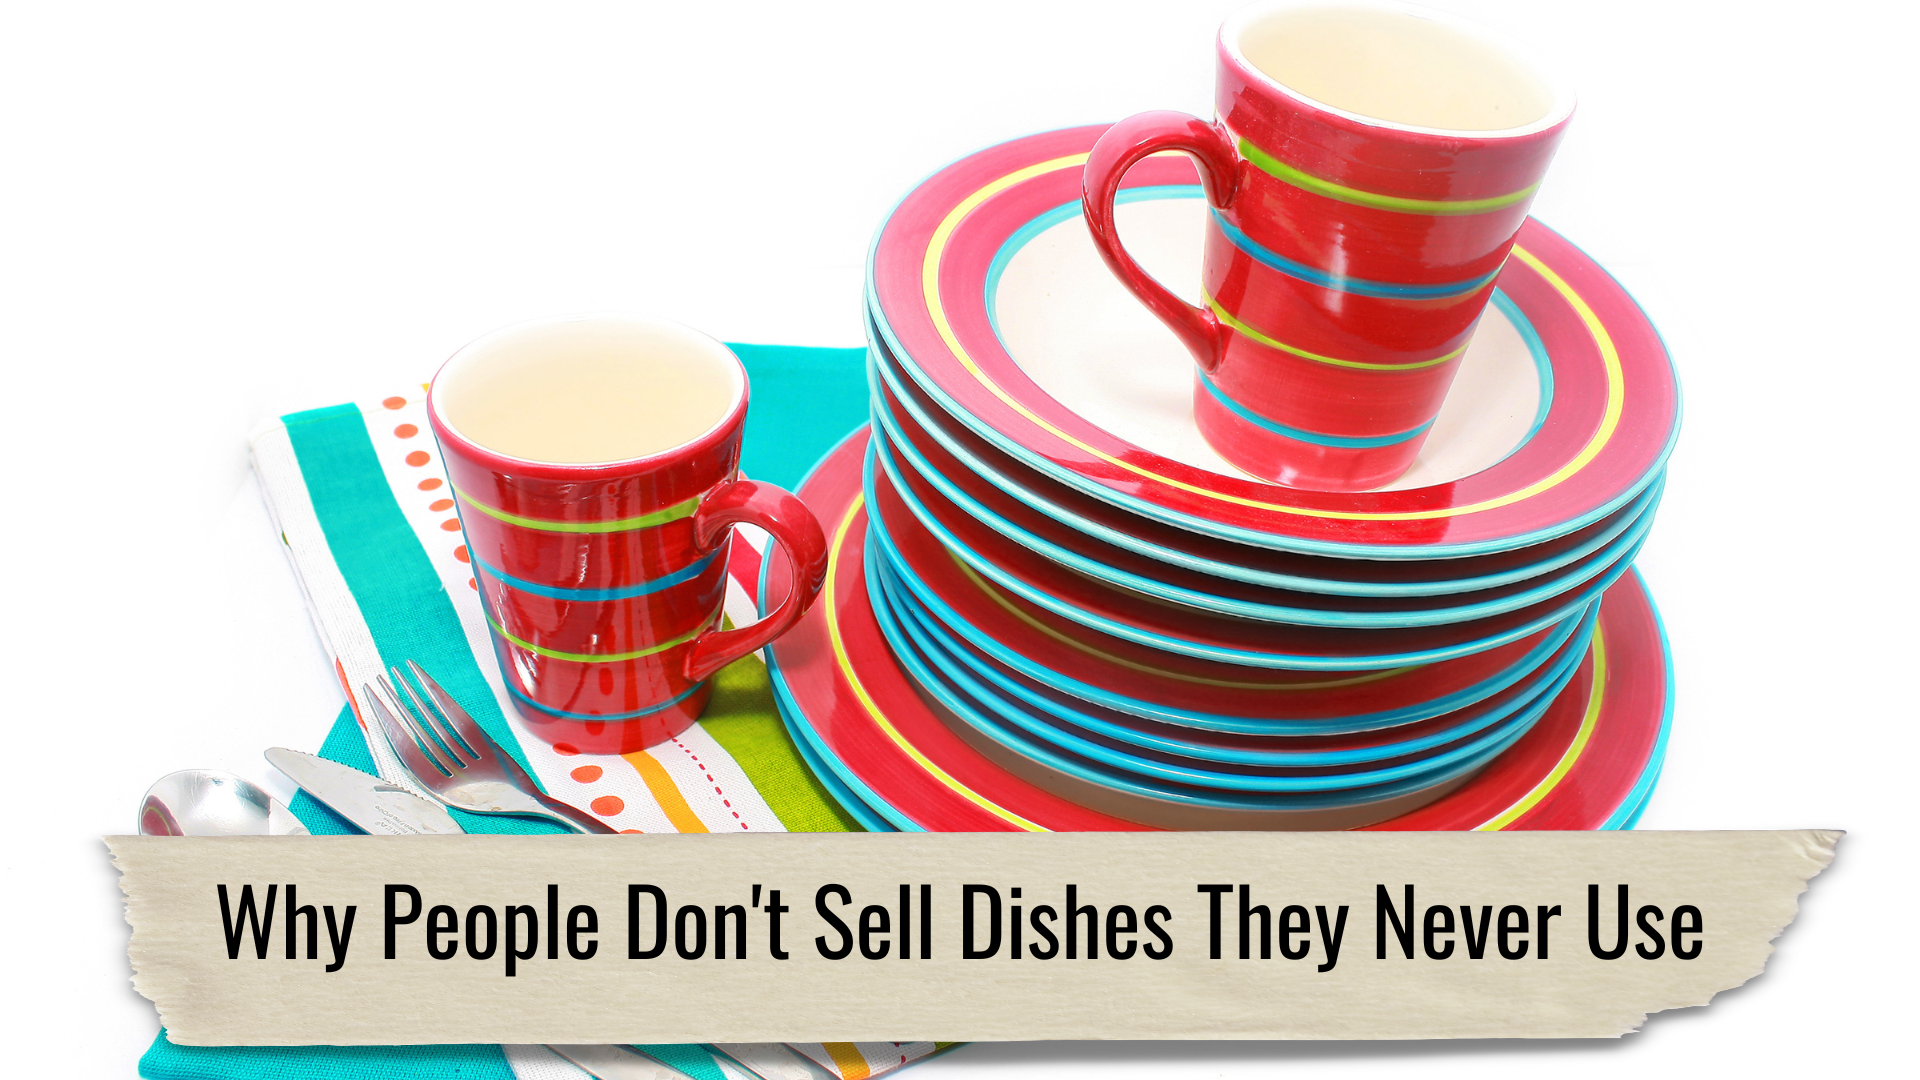 04 Why People Dont Sell Dishes They Never Use